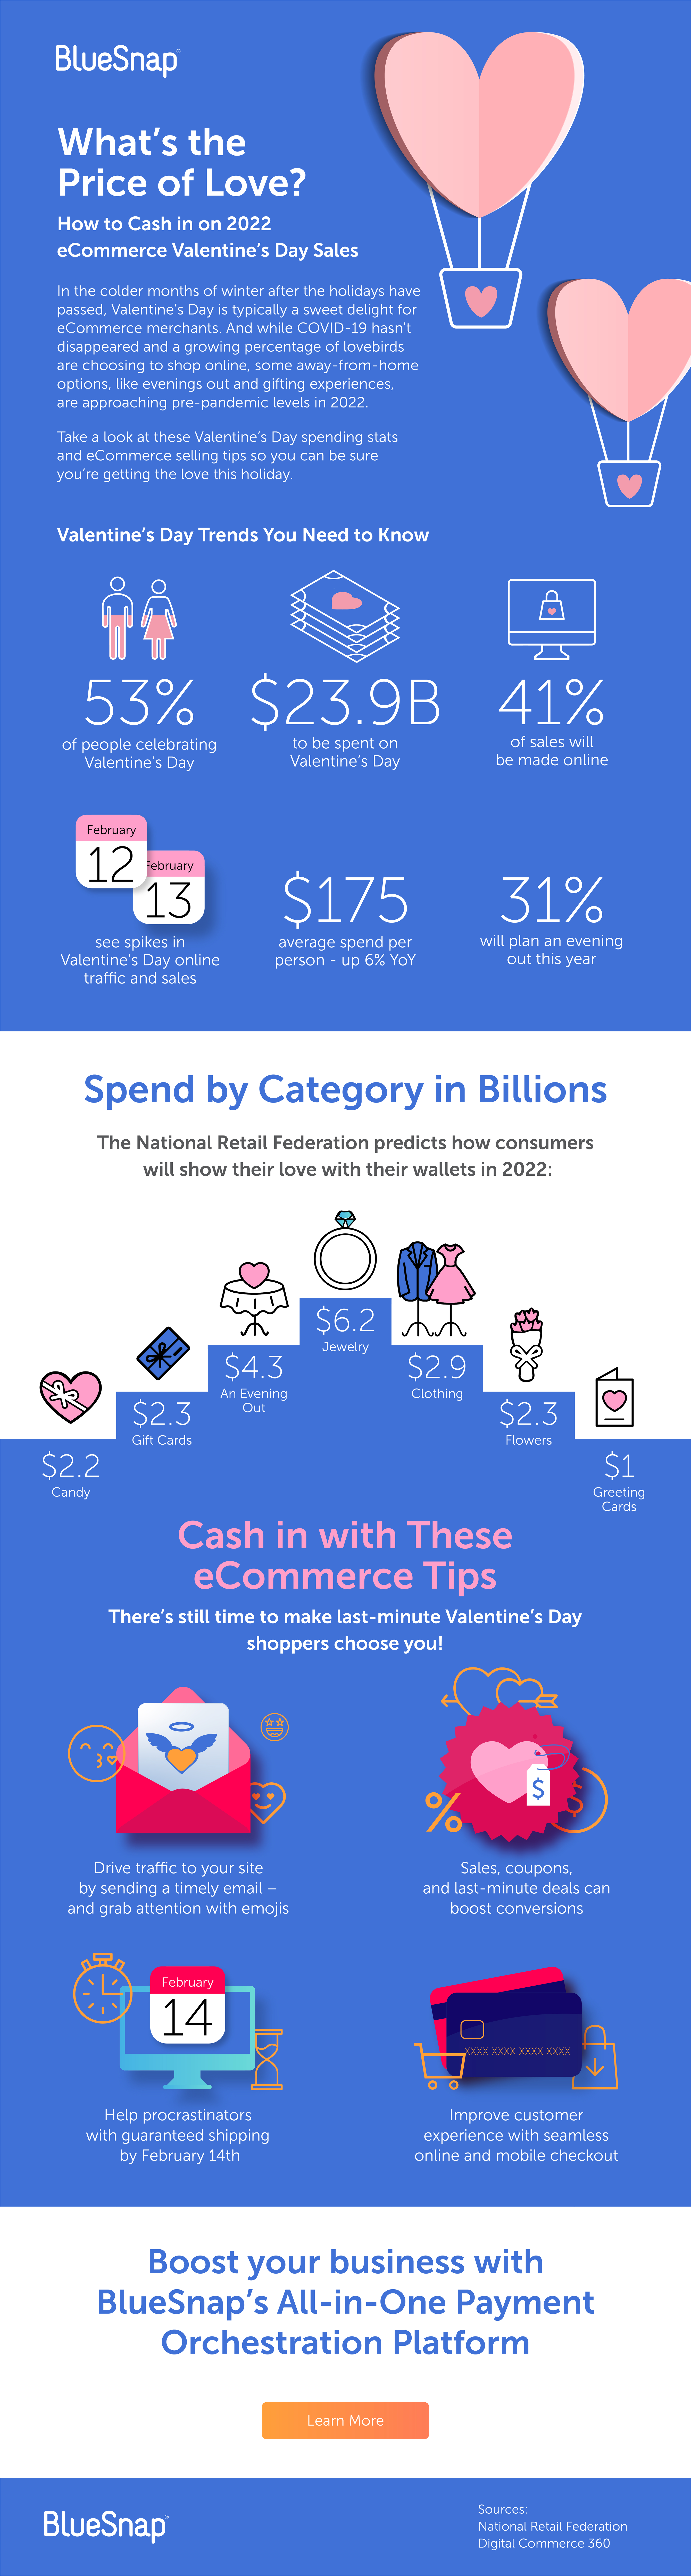 Cash in on last-minute Valentine's Day eCommerce sales